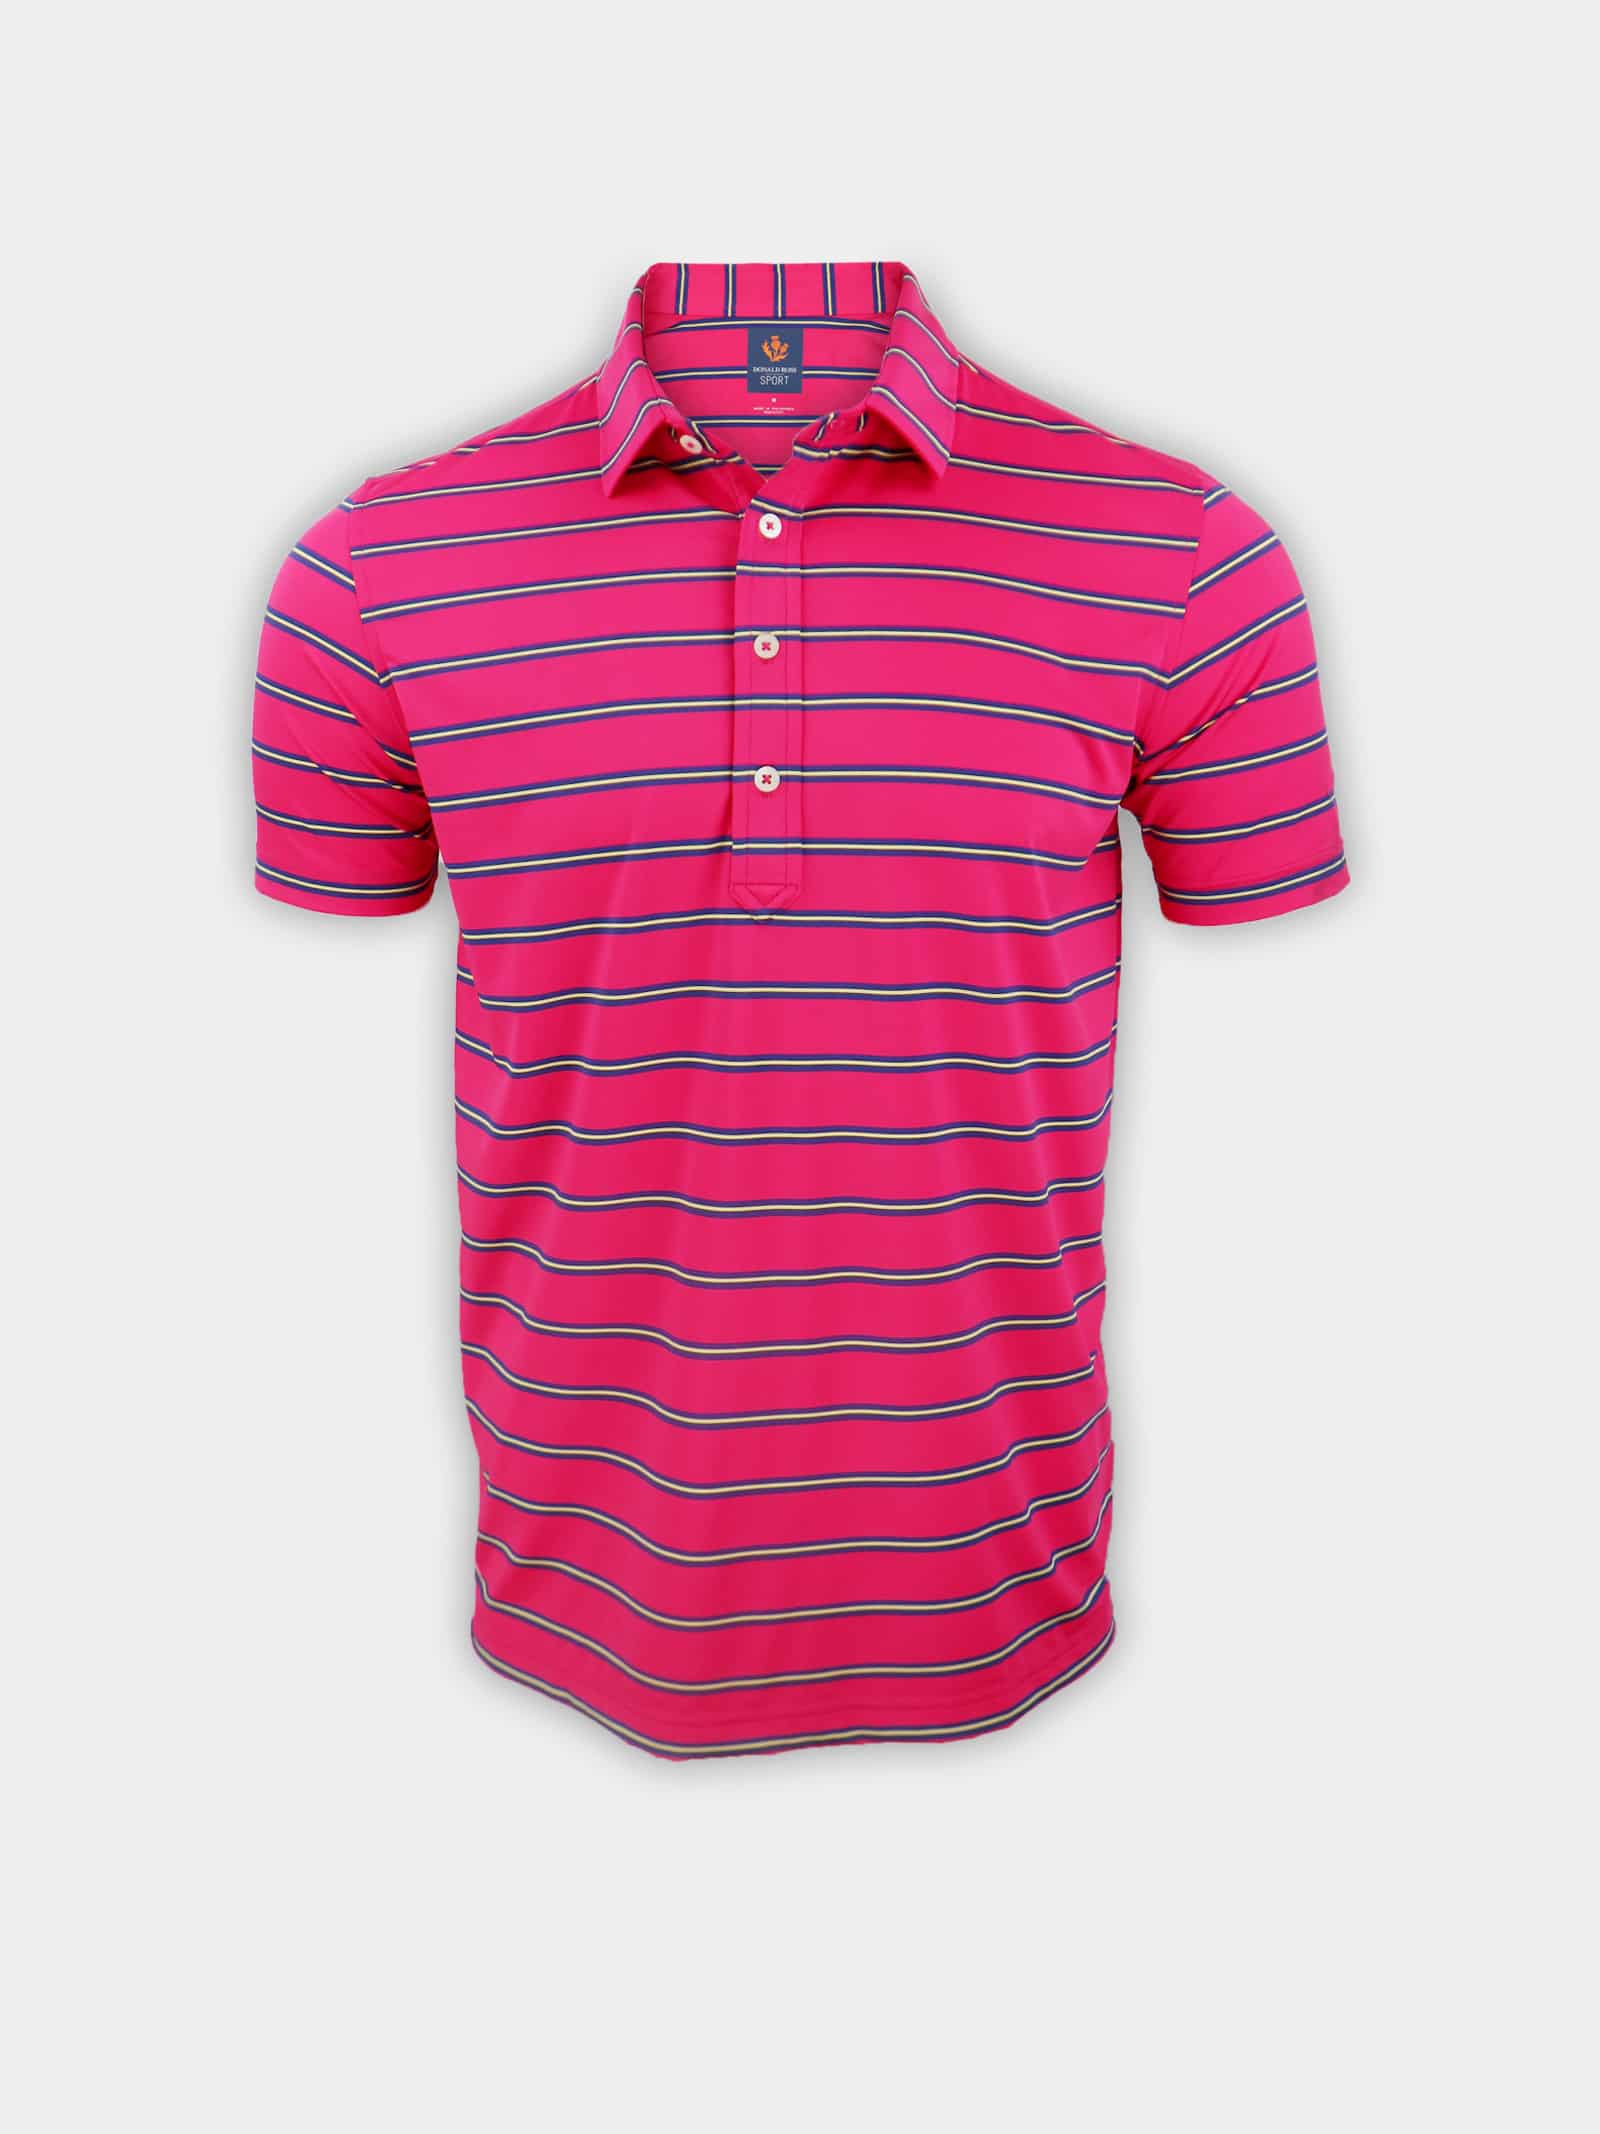 Men's Golf Polo and Shirts